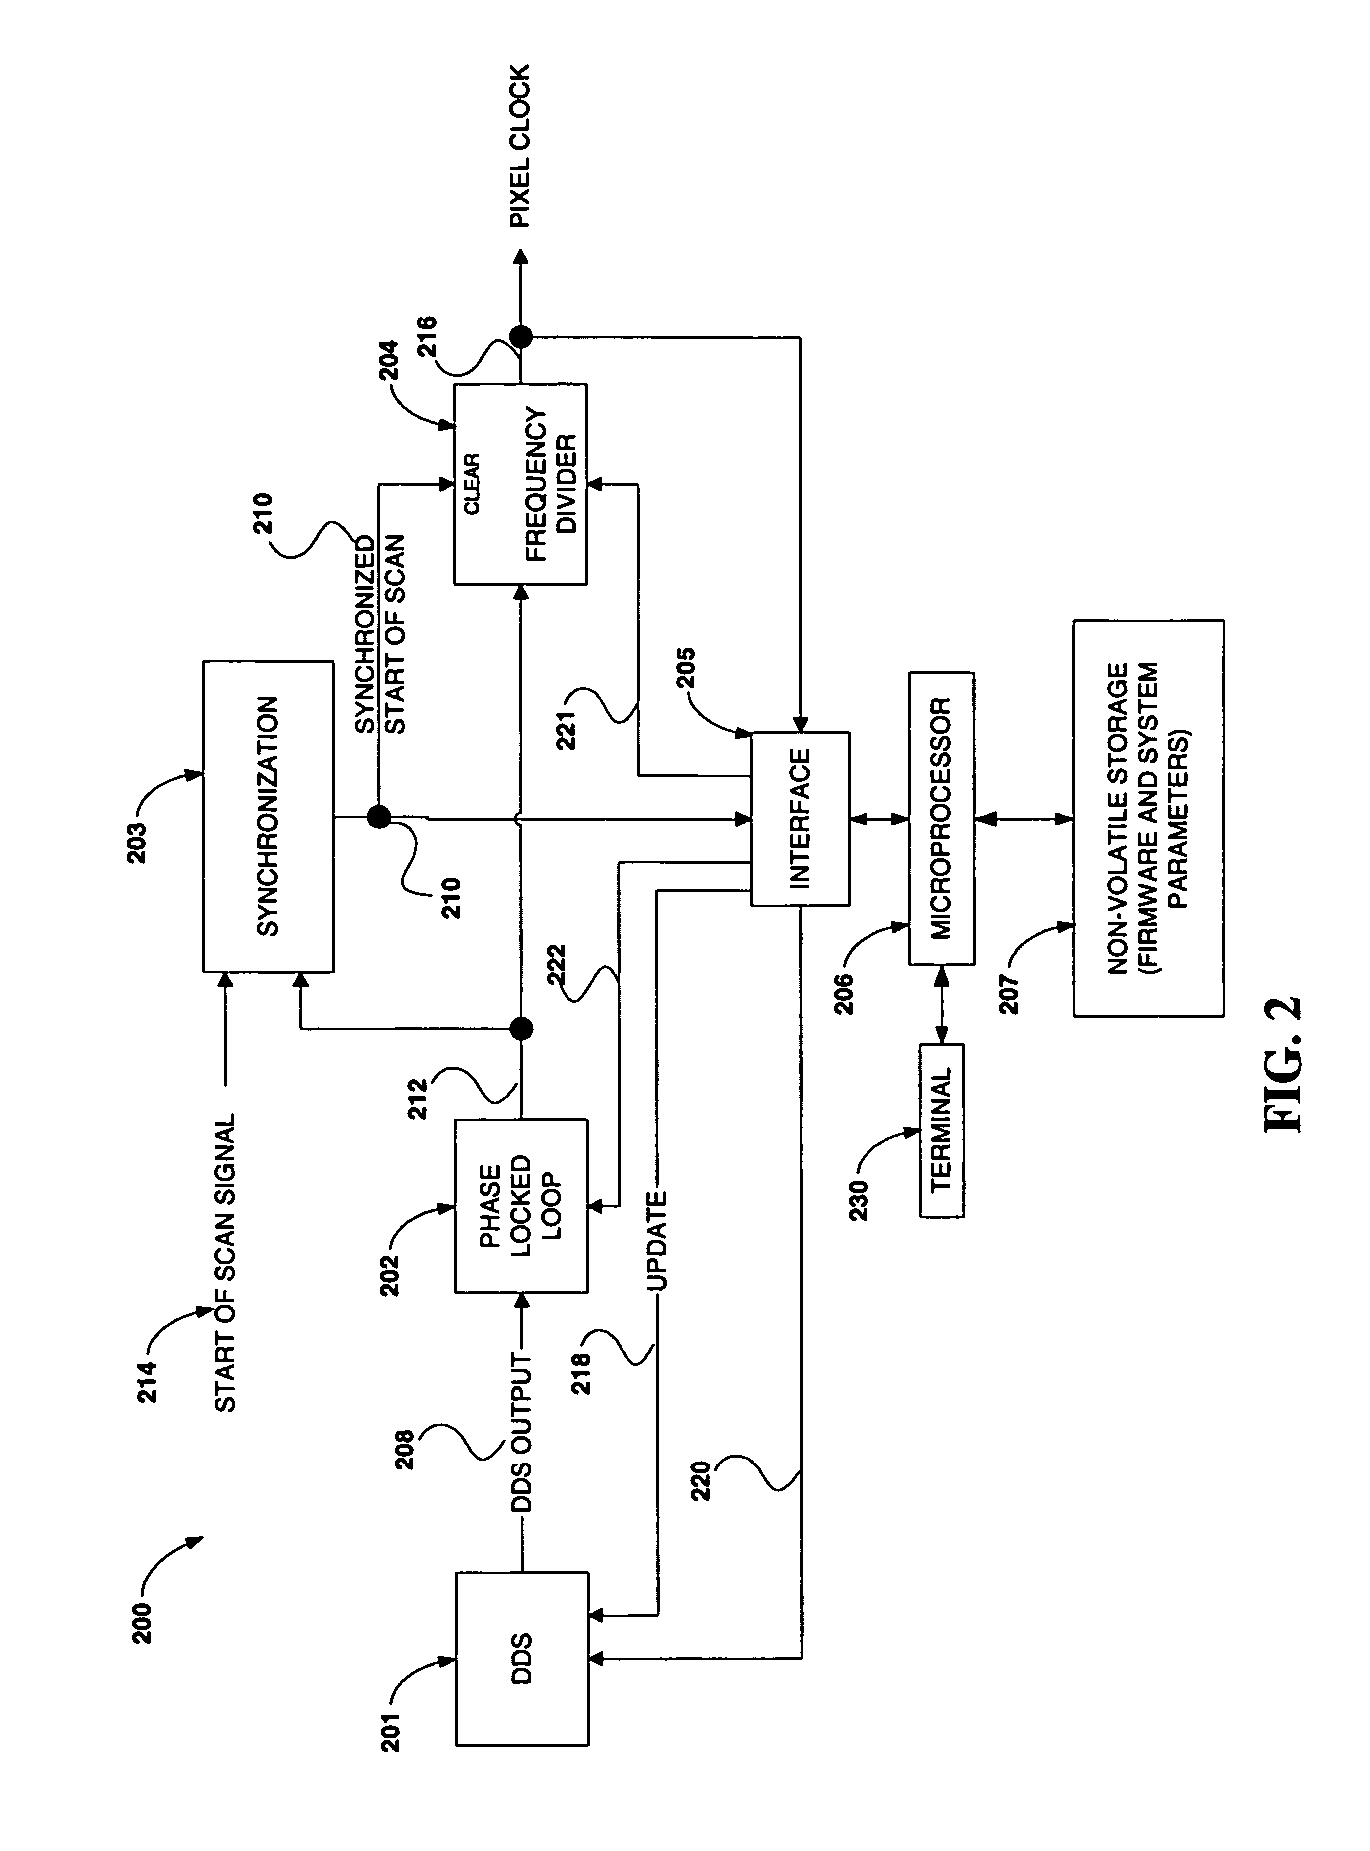 System and method for correcting scan position errors in an imaging system